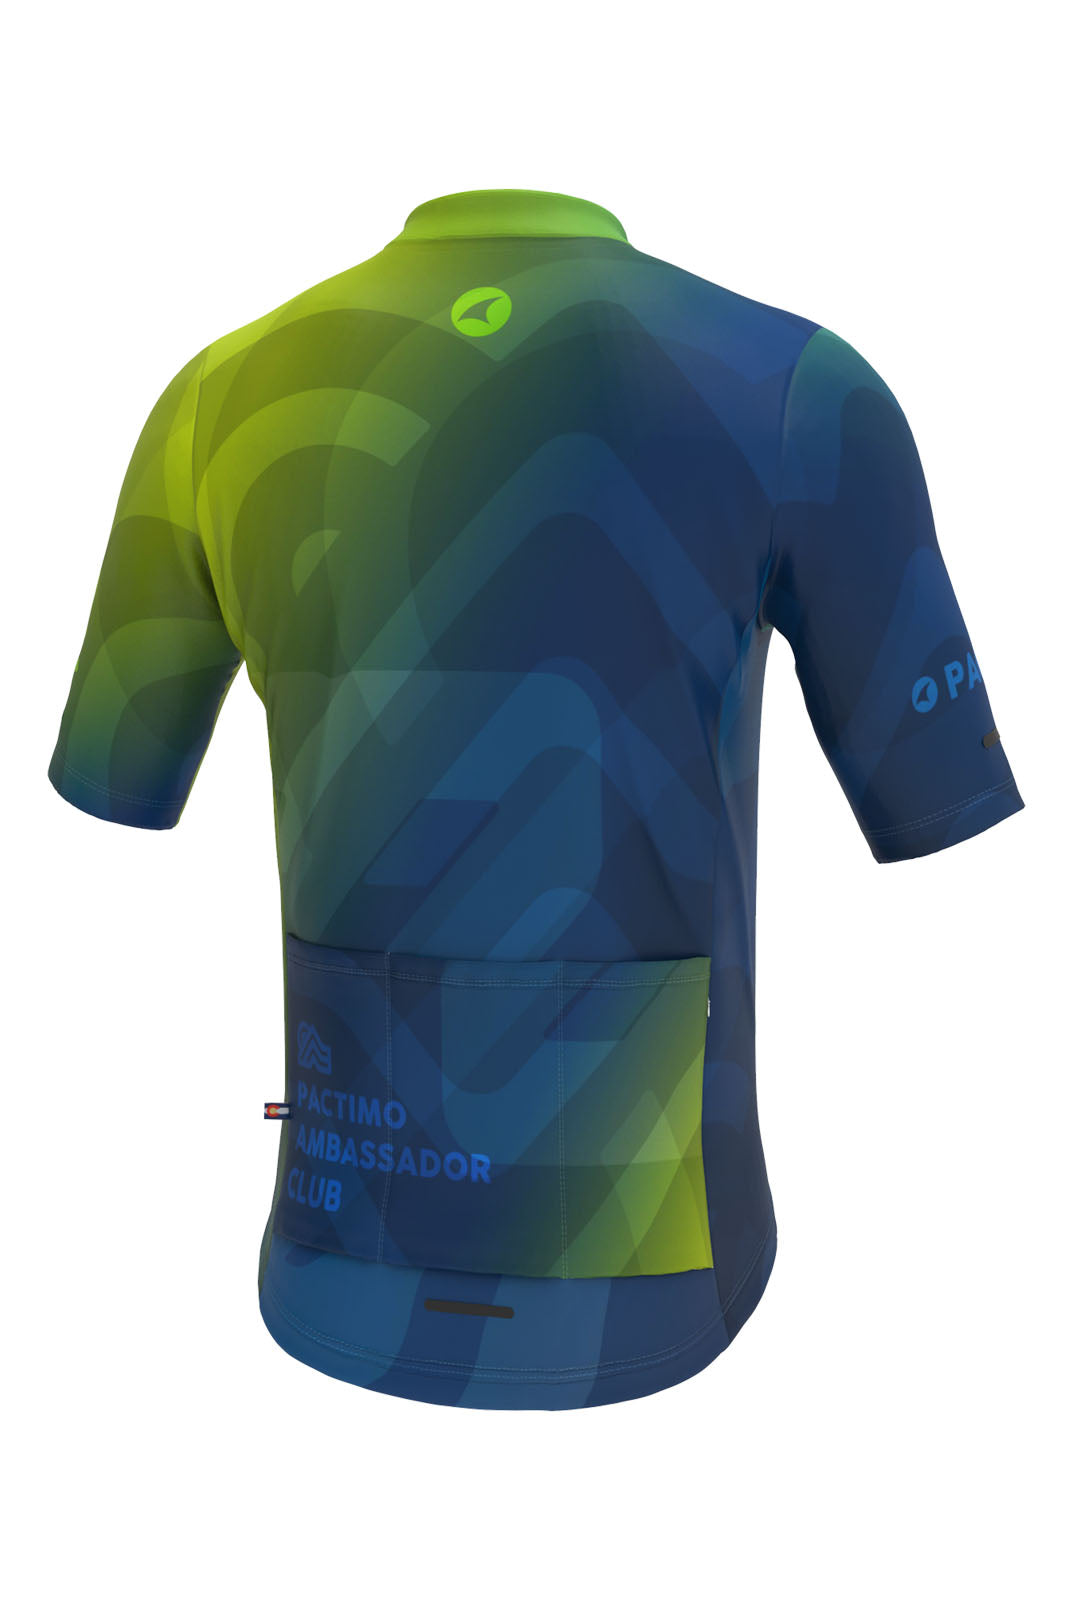 Men's PAC Ascent Cycling Jersey - Cool Fade Back